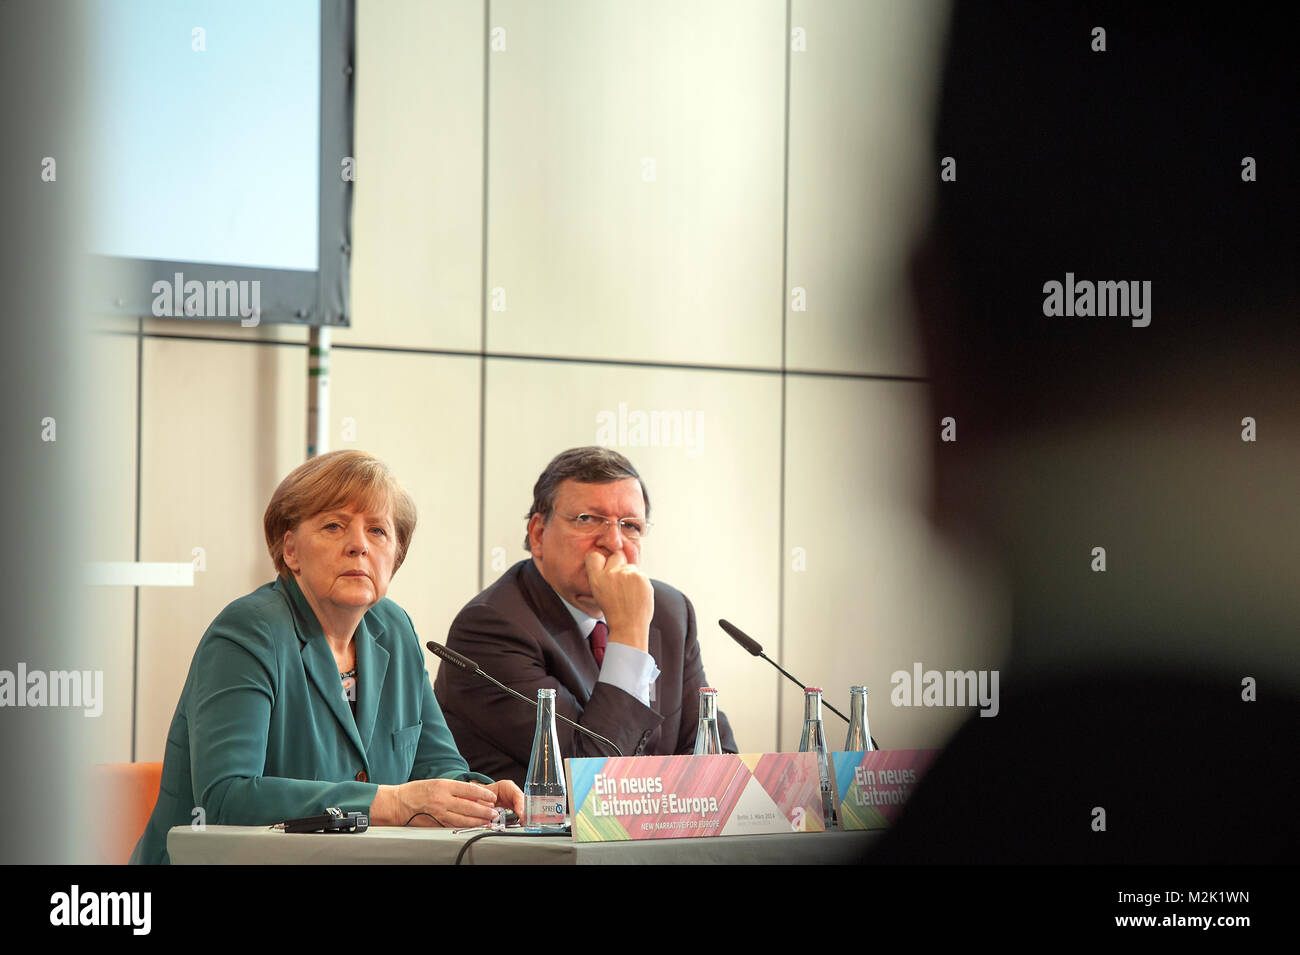 Federal Chancellor, Angela Merkel(CDU) gives a speech in the conference 'New Narrative for Europe”/  “A new Theme for Europe” with a especial participation European Commission President Barroso(PDS) and State Minister Monika Grütters(CDU) in Berlin . Stock Photo